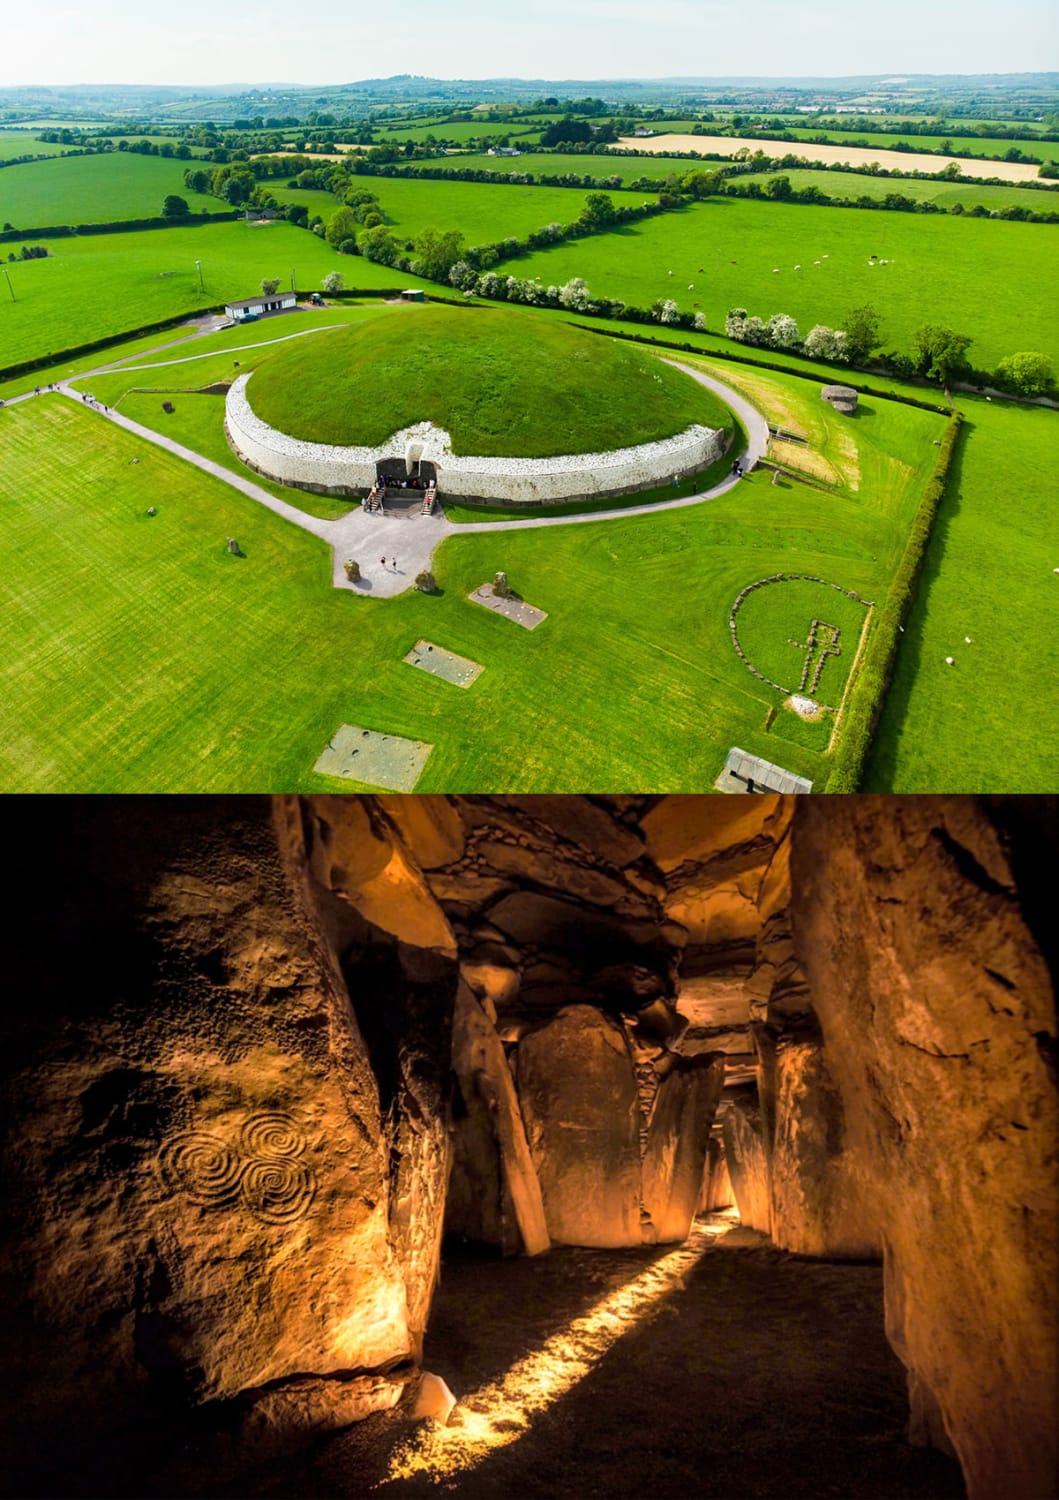 Newgrange is a grand passage tomb in Ireland, built around 3200 BC, making it older than Stonehenge and the Egyptian pyramids. It's best known for the illumination of its passage and chamber by the Winter Solstice sun through a 'roofbox' located above the passage entrance